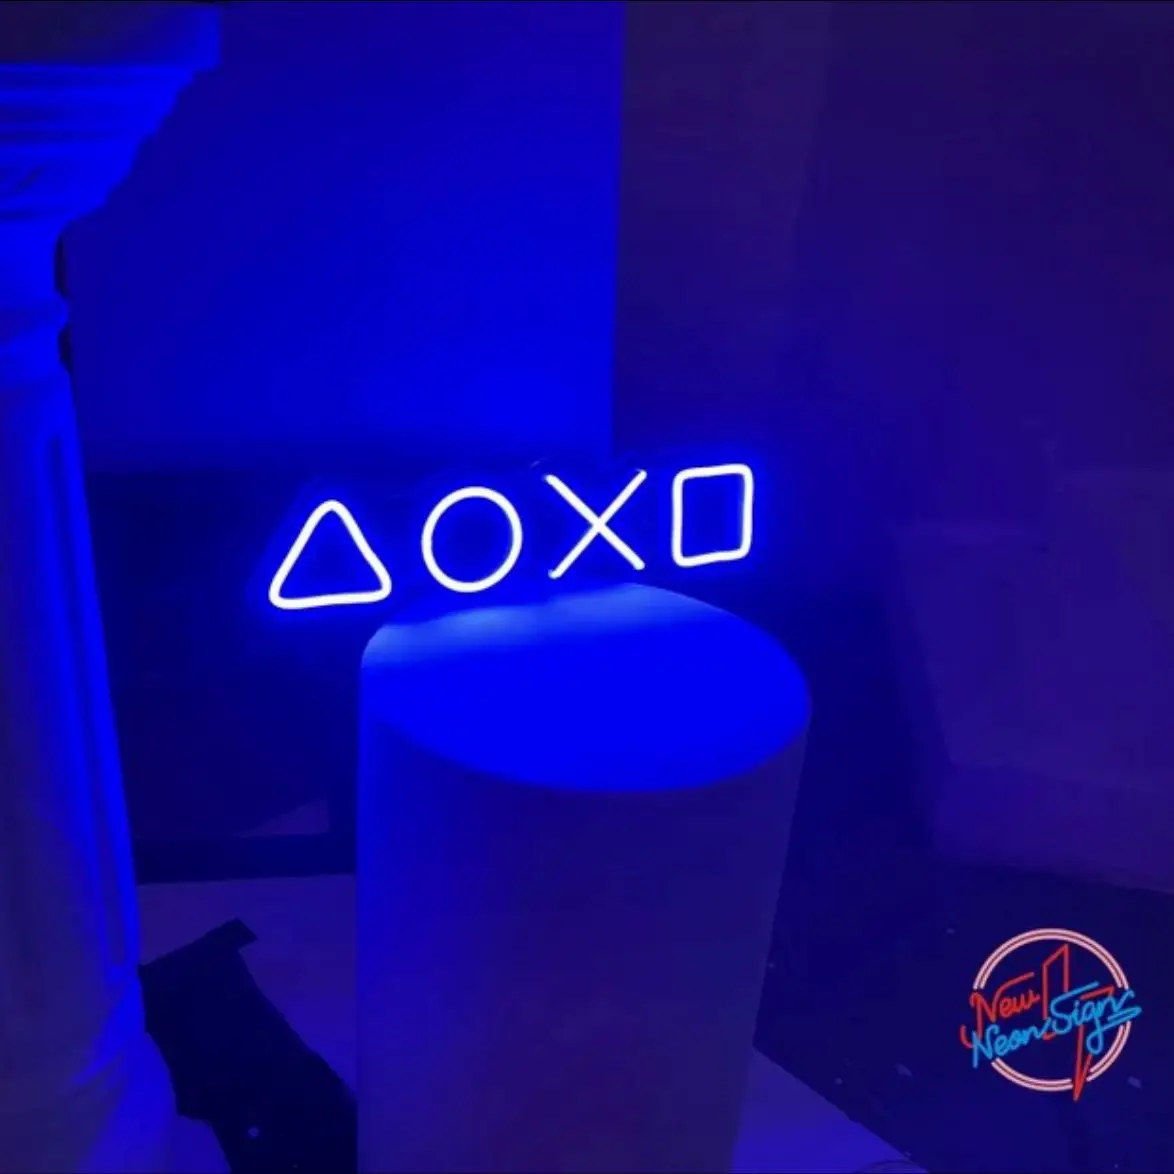 Play Station Neon Signs Party Decor Light Signs Event Lights Birthday Gifts Custom Neon Signs Wedding Neon Sign Personalized